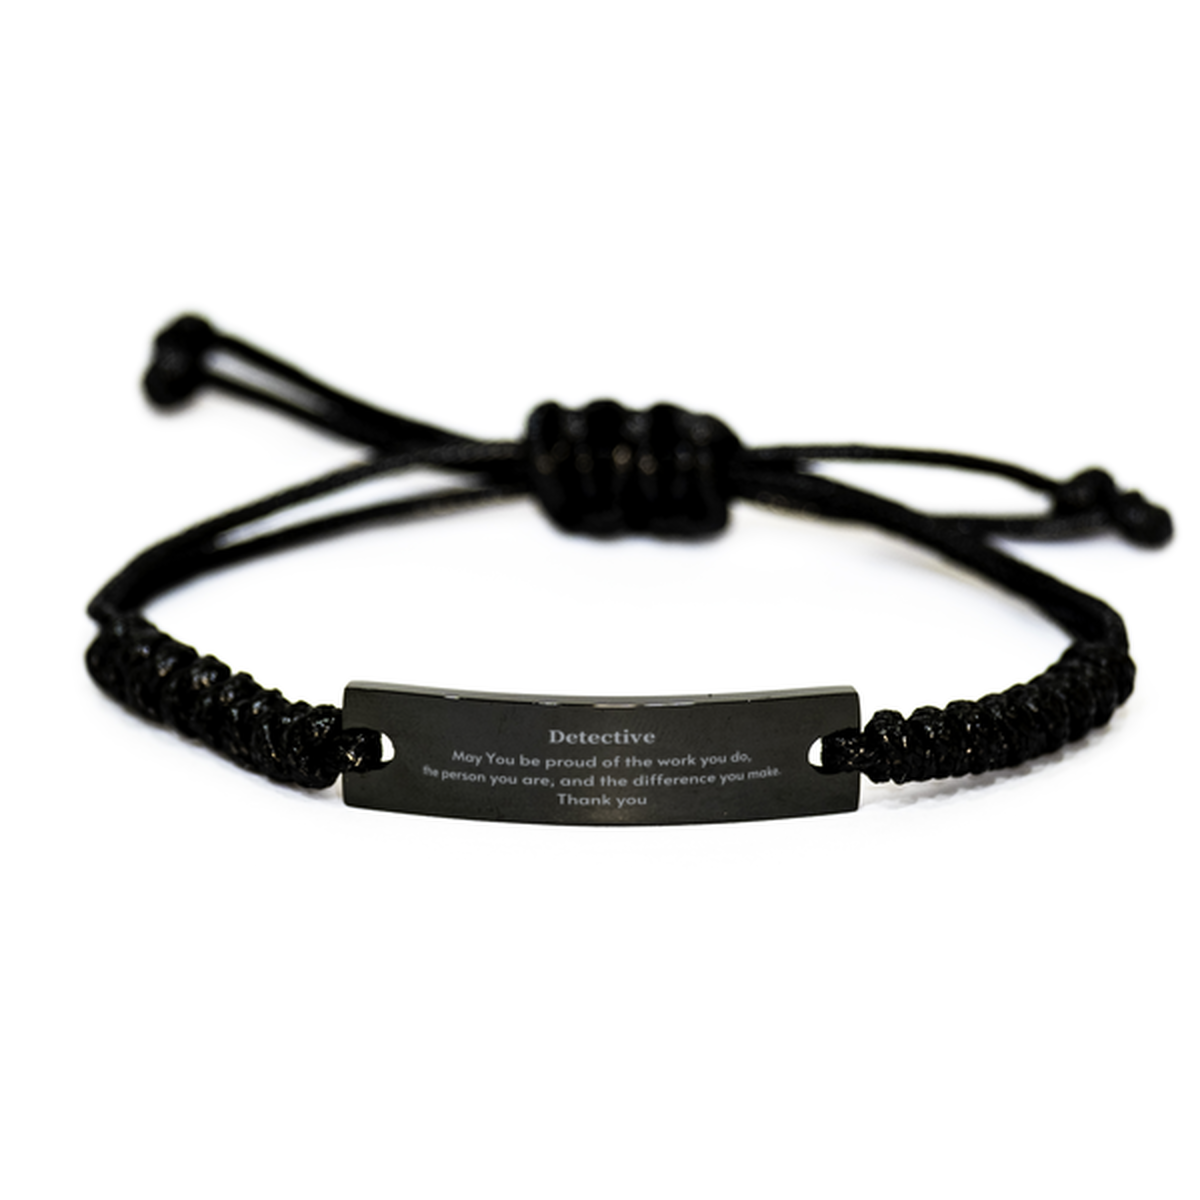 Heartwarming Black Rope Bracelet Retirement Coworkers Gifts for Detective, Detective May You be proud of the work you do, the person you are Gifts for Boss Men Women Friends